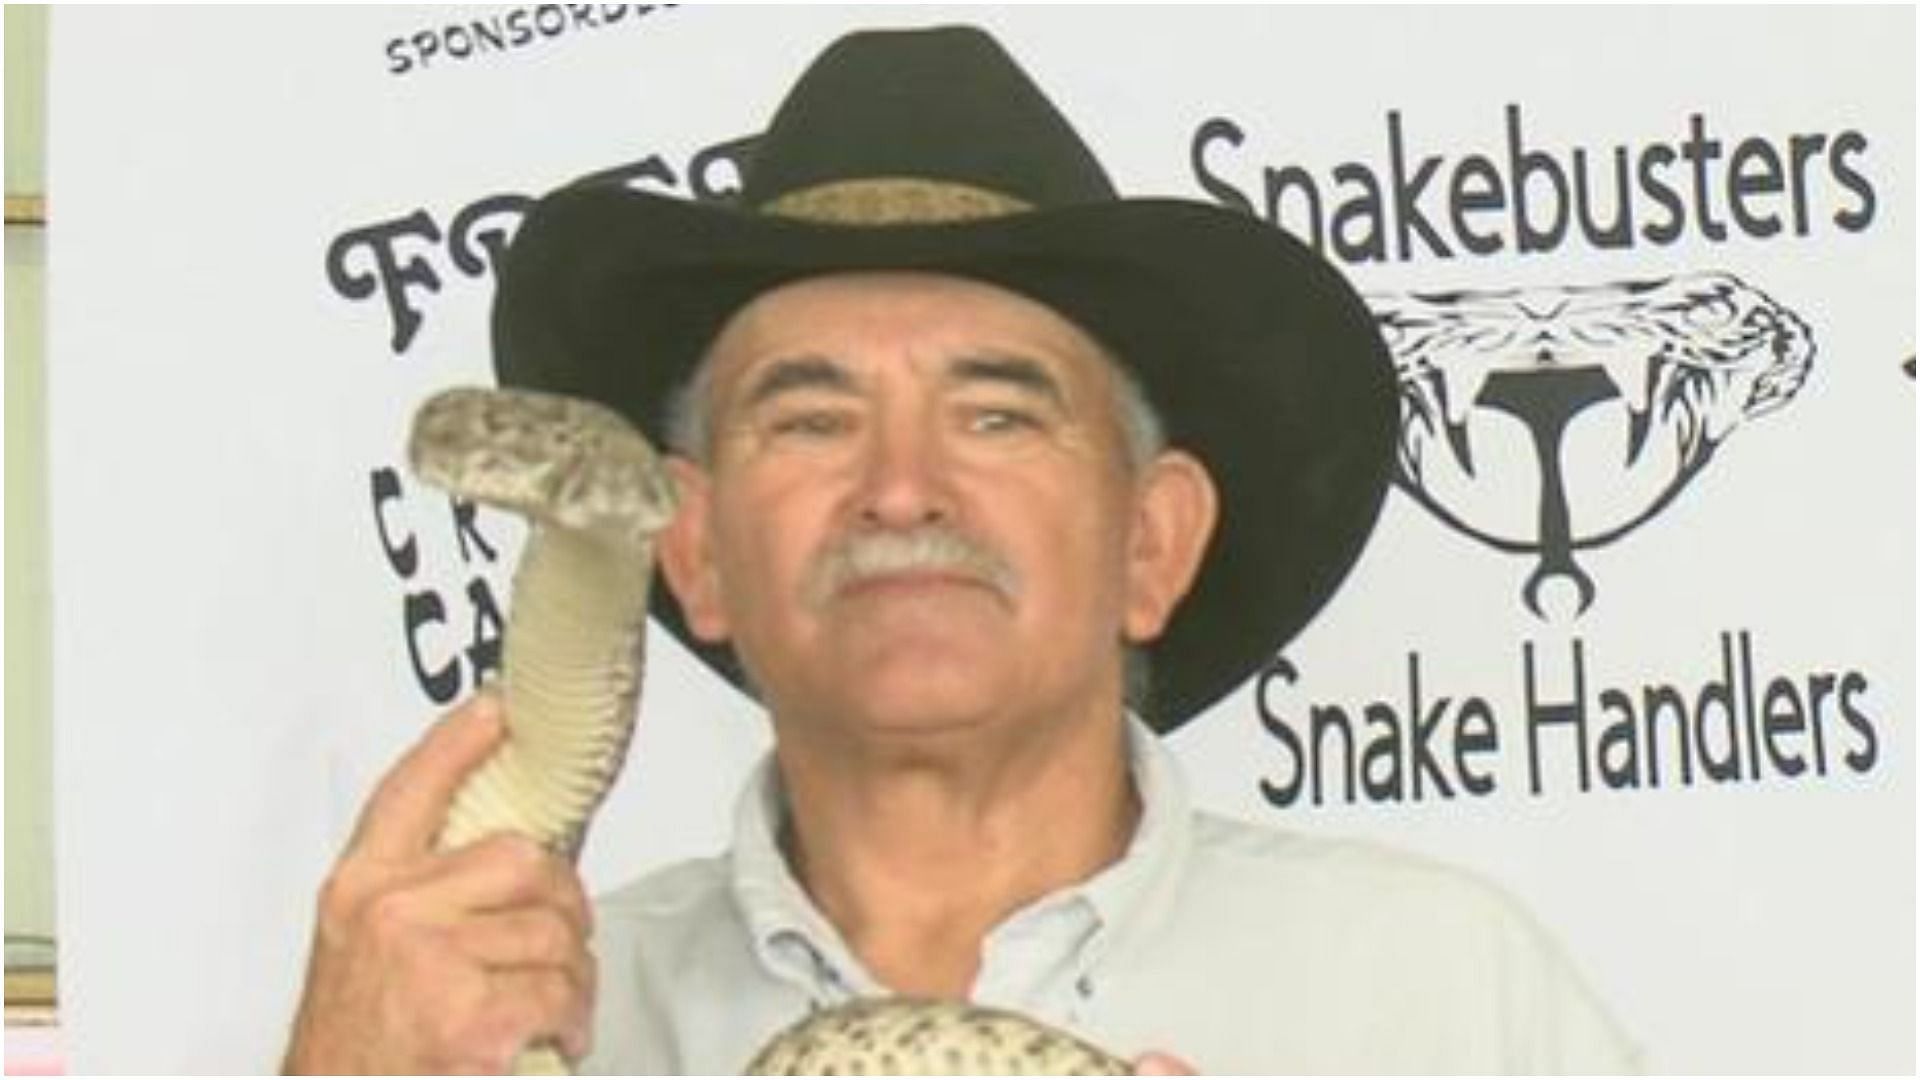 Eugene DeLeon Sr. was at the Rattlesnake Roundup event when the incident happened (Image via Monica Loop Casiano/Facebook)